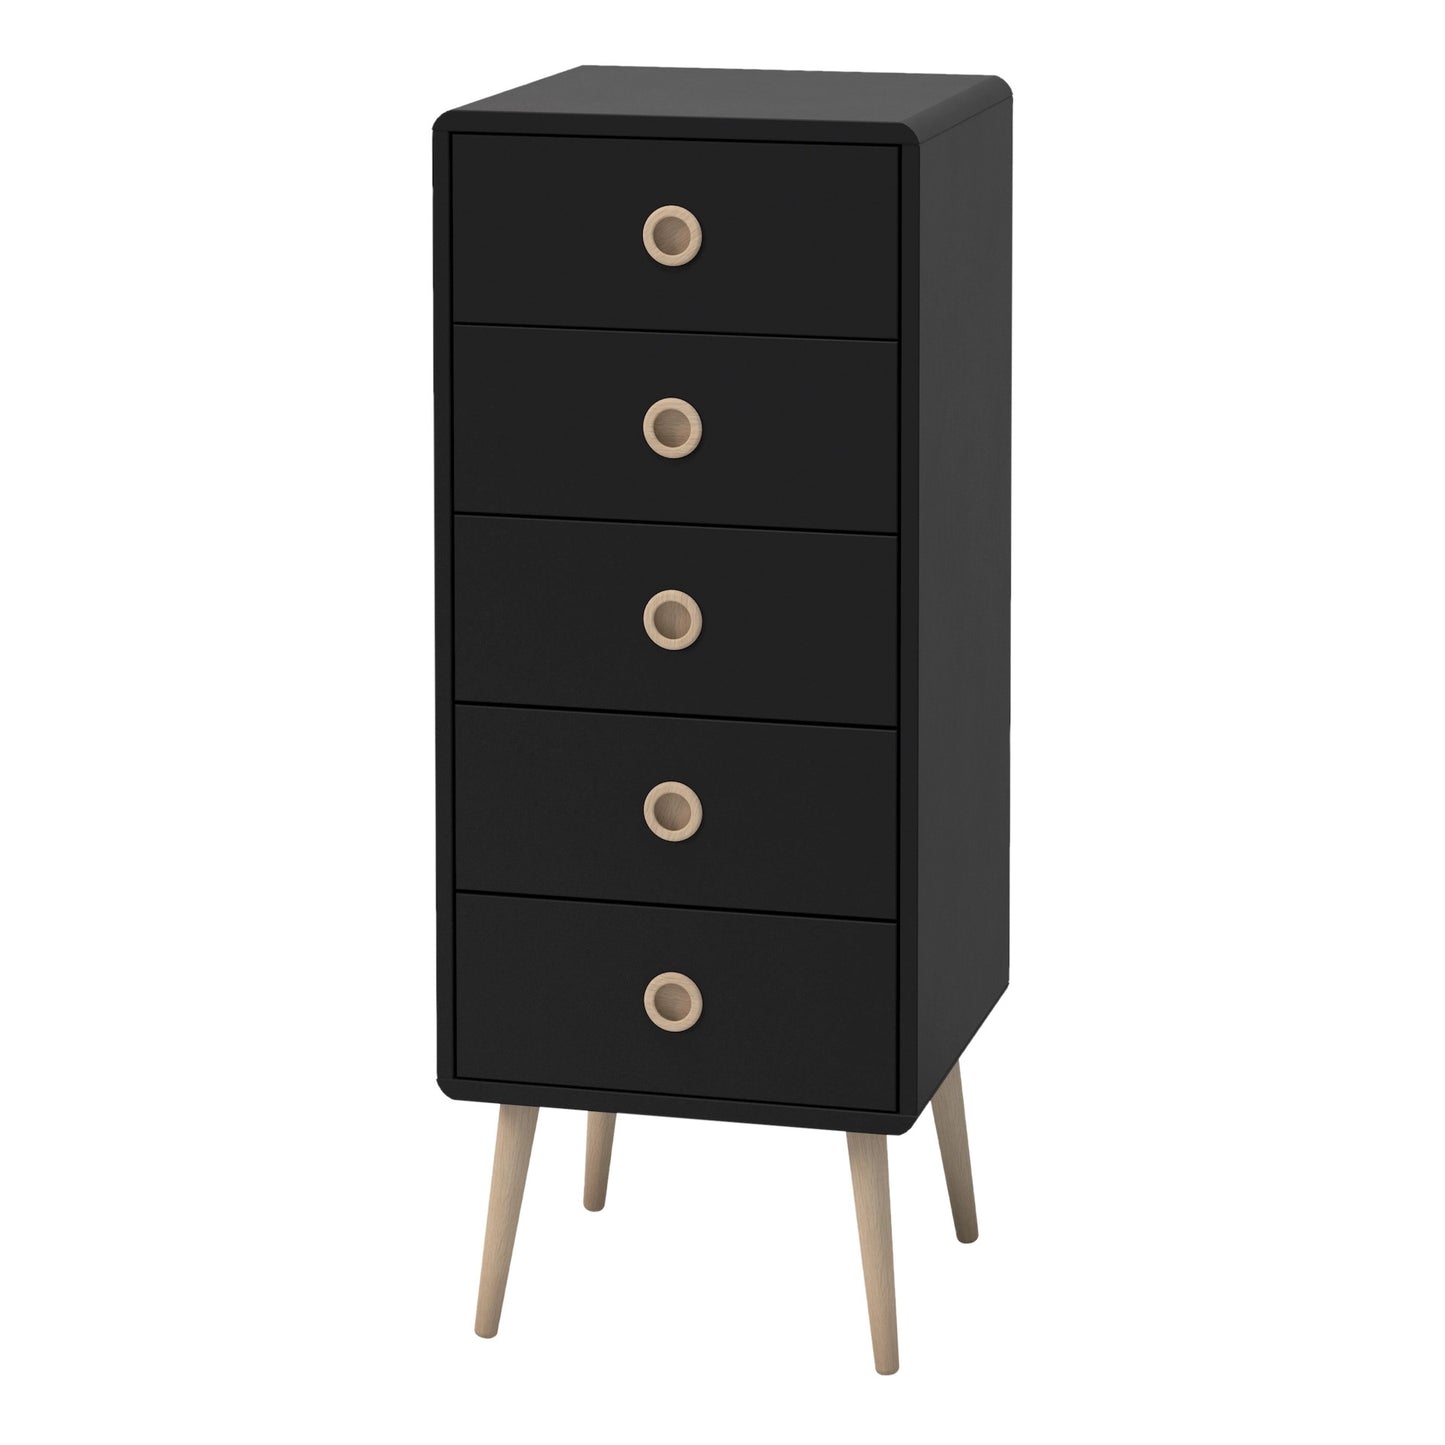 Furniture To Go Softline 5 Drawer Narrow Black Painted